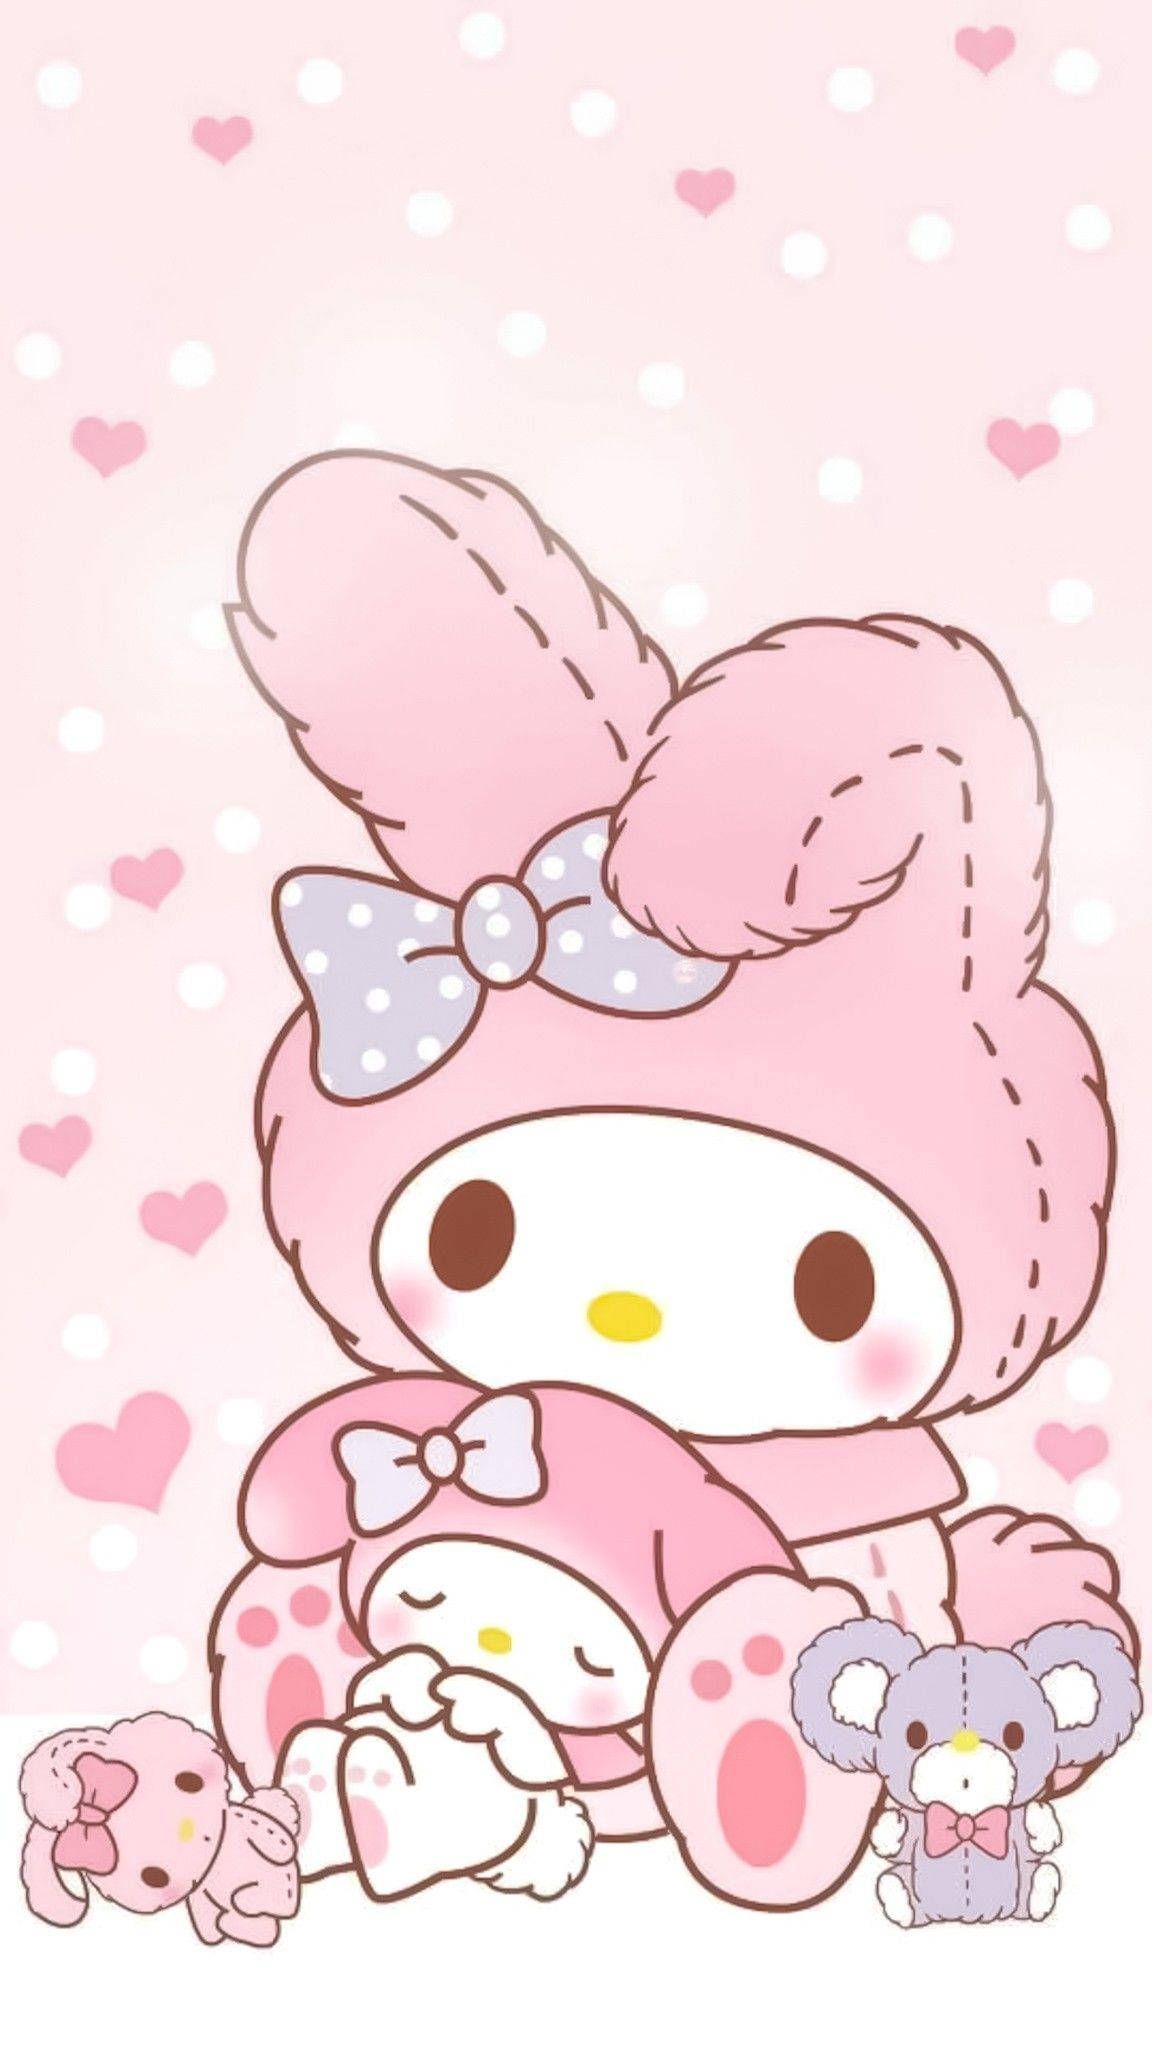 My Melody iPhone Wallpaper with high-resolution 1080x1920 pixel. You can use this wallpaper for your iPhone 5, 6, 7, 8, X, XS, XR backgrounds, Mobile Screensaver, or iPad Lock Screen - My Melody